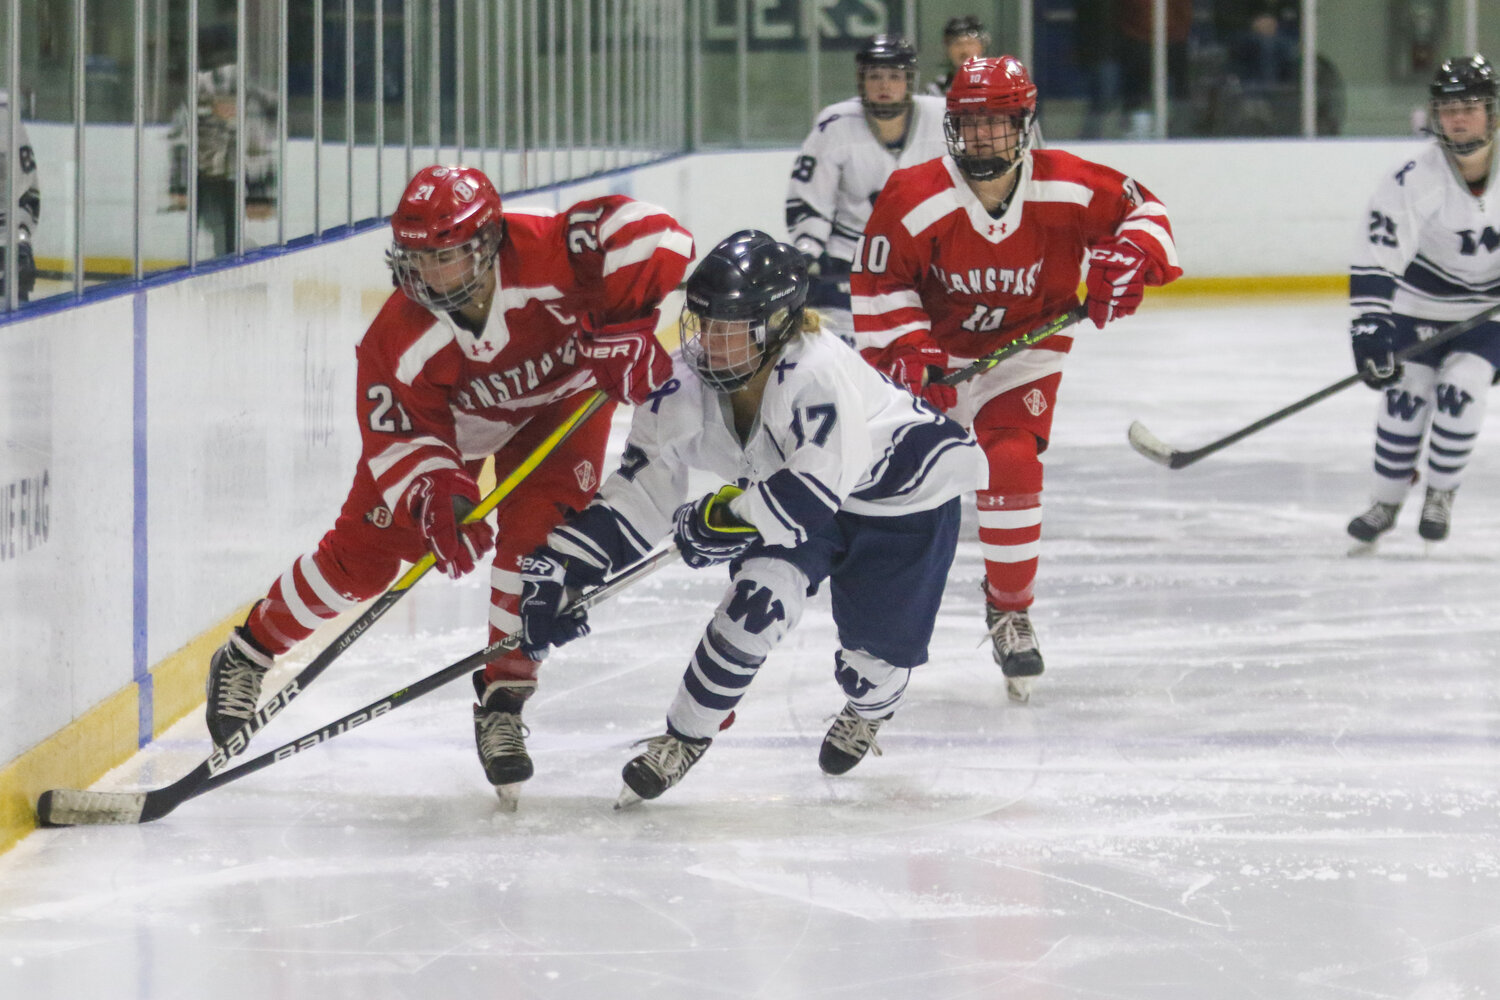 Bailey Lower (17) and a Barnstable player battle for possession during Saturday's game.